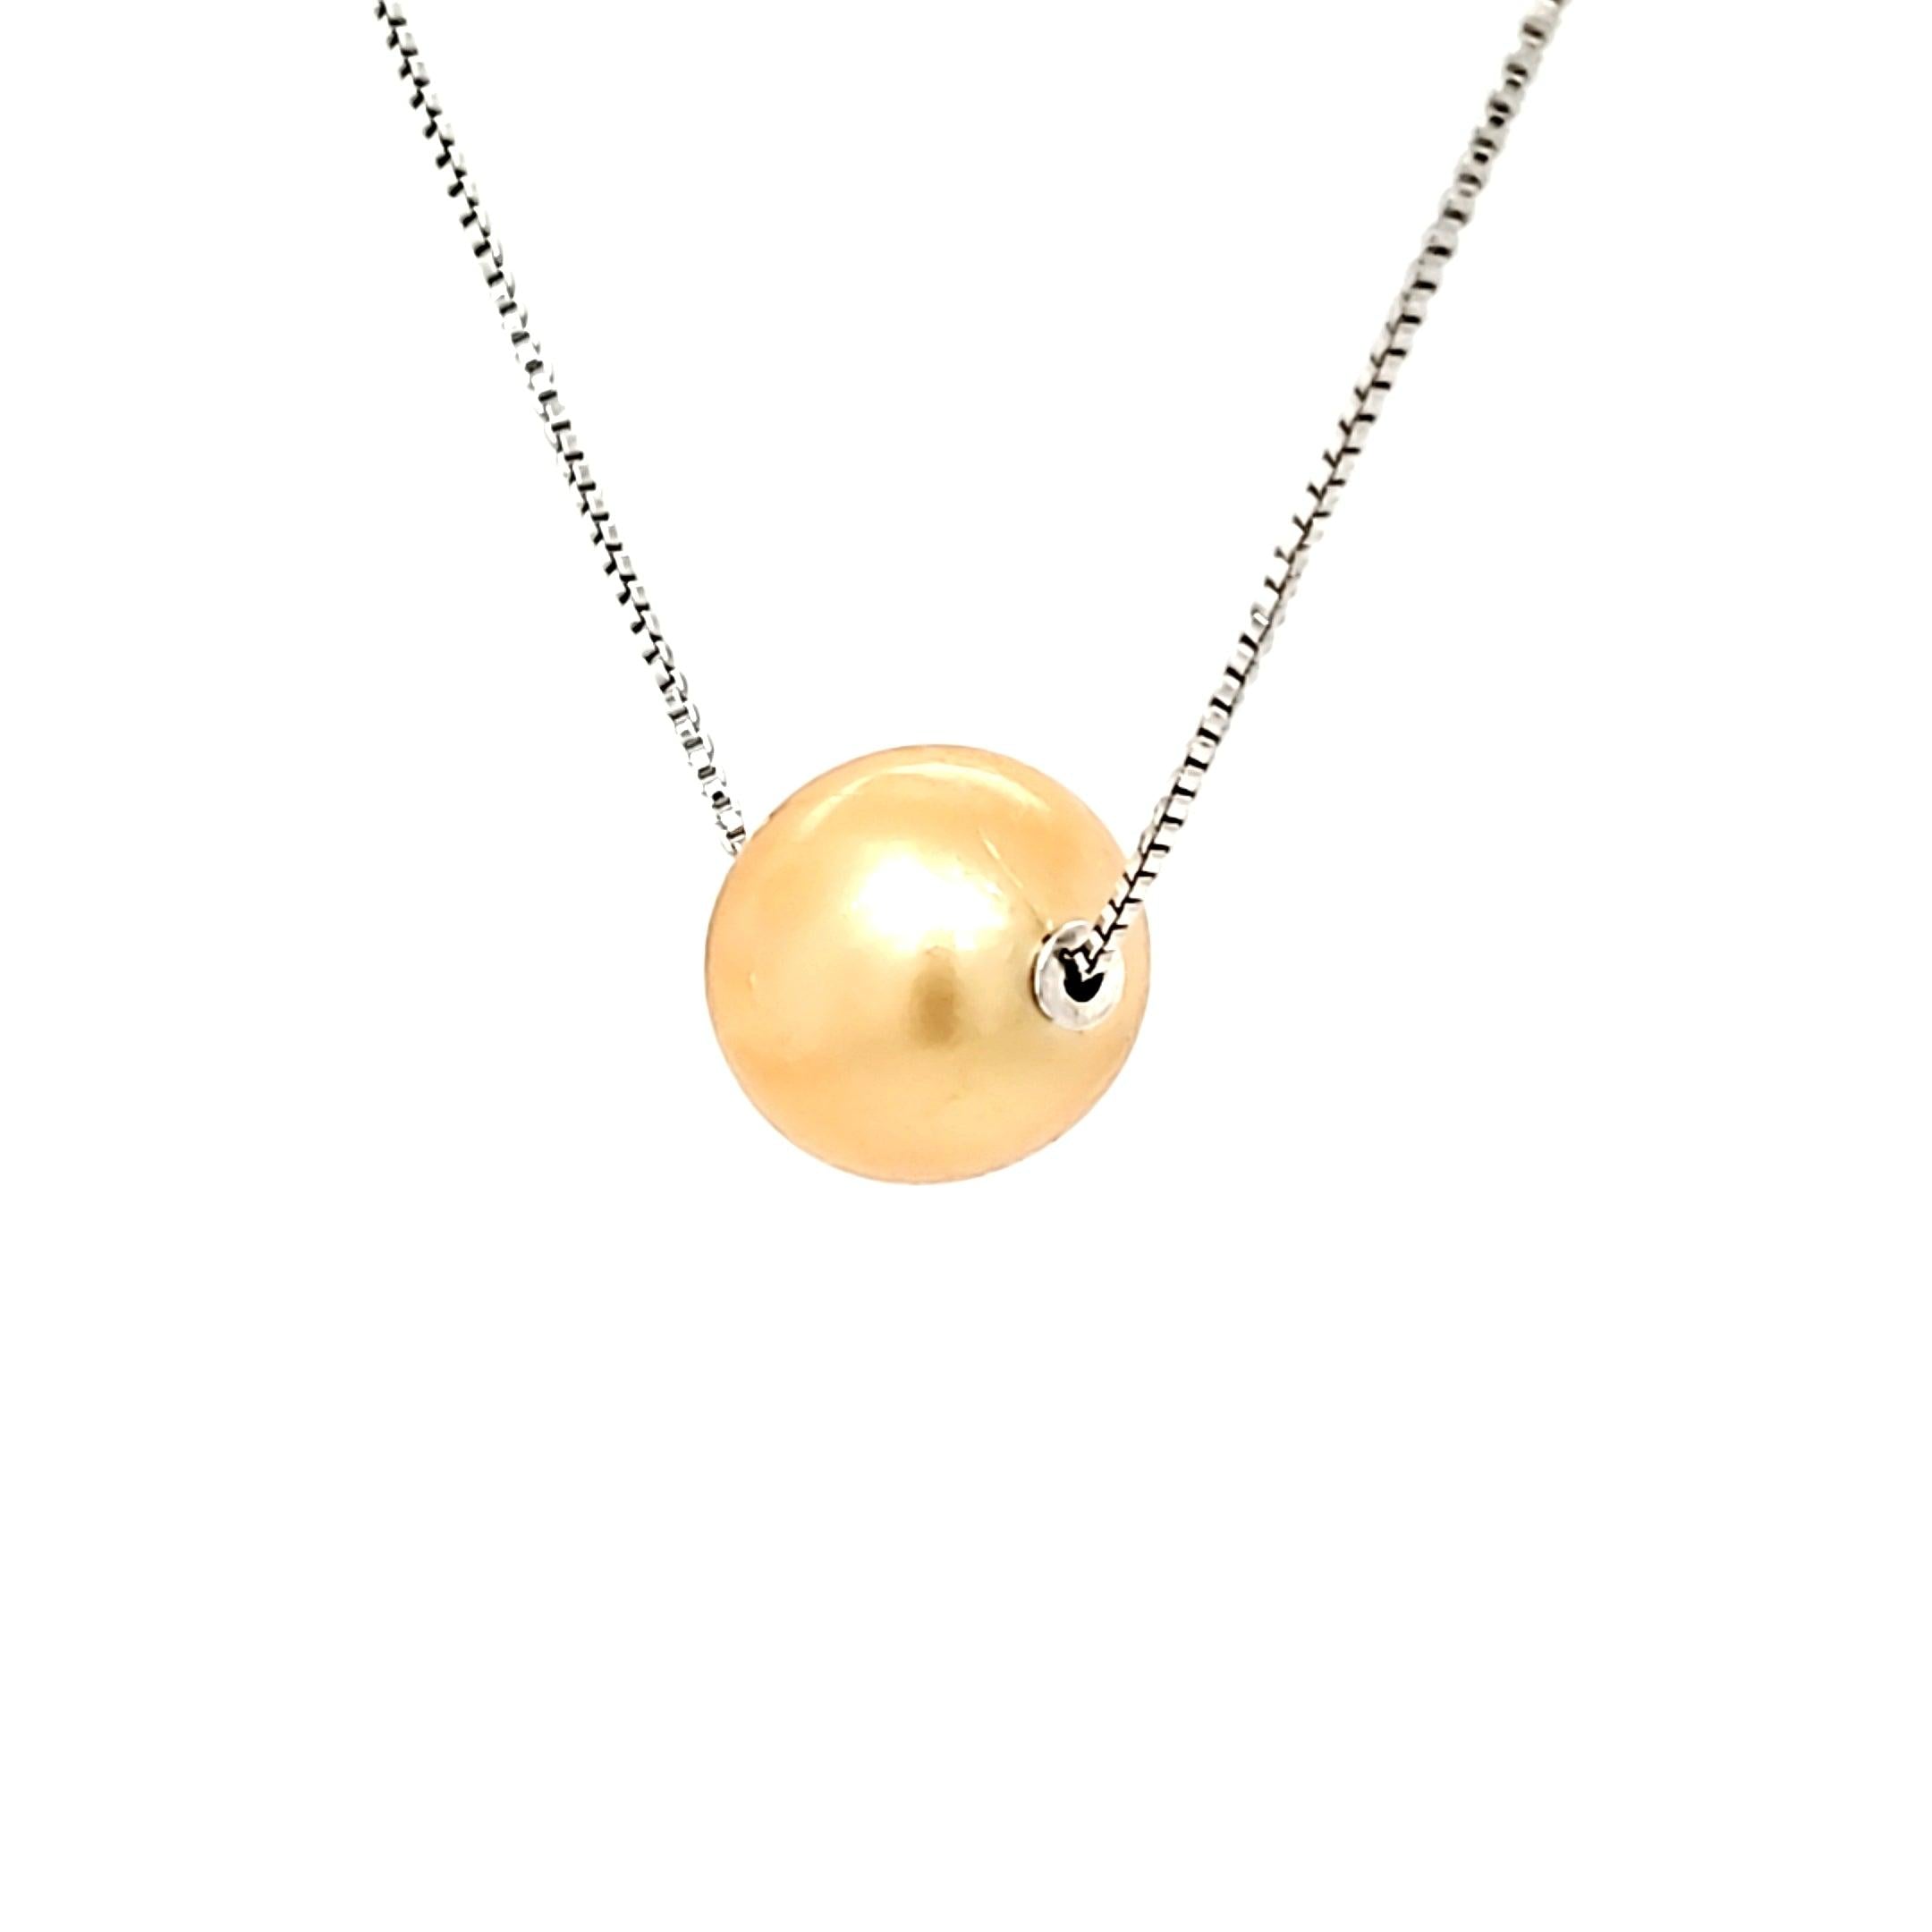 “Aurous” - Cultured Golden South Sea Pearl on Sterling Silver Chain - The Rutile Ltd